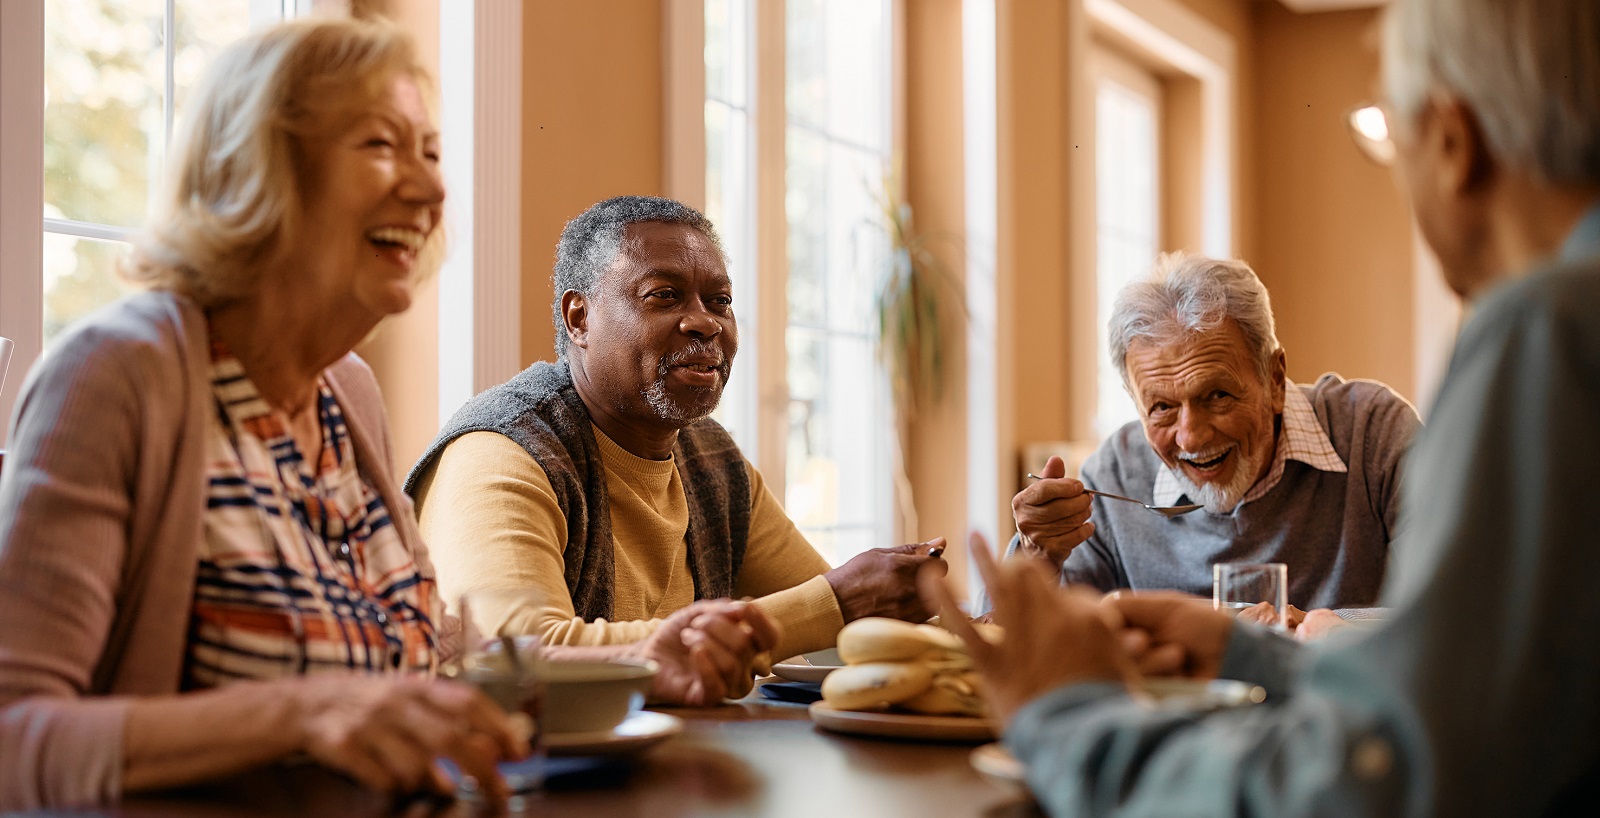 older people at a dining table - one man with white hair & beard, one black man in yellow shirt & green cardigan, woman with white hair, 3/4 back view of man wearing glasses - stock image from shutterstock